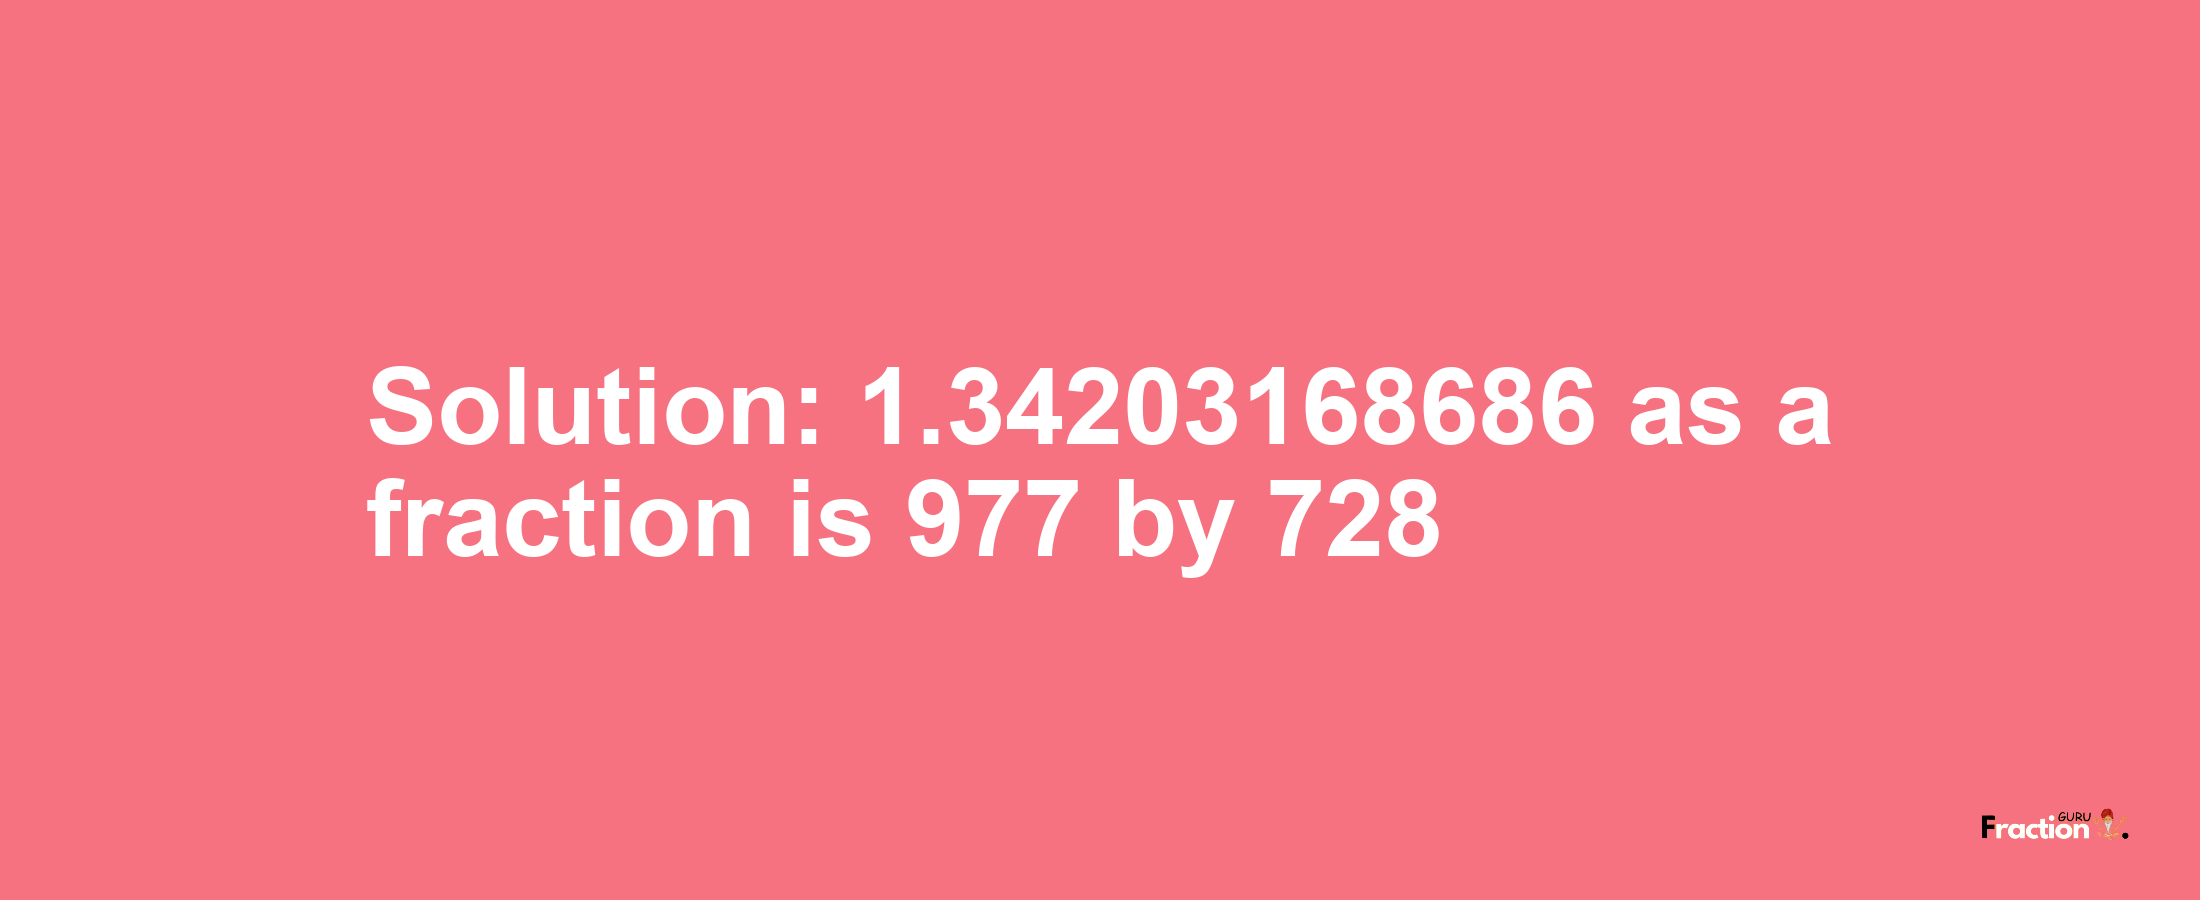 Solution:1.34203168686 as a fraction is 977/728